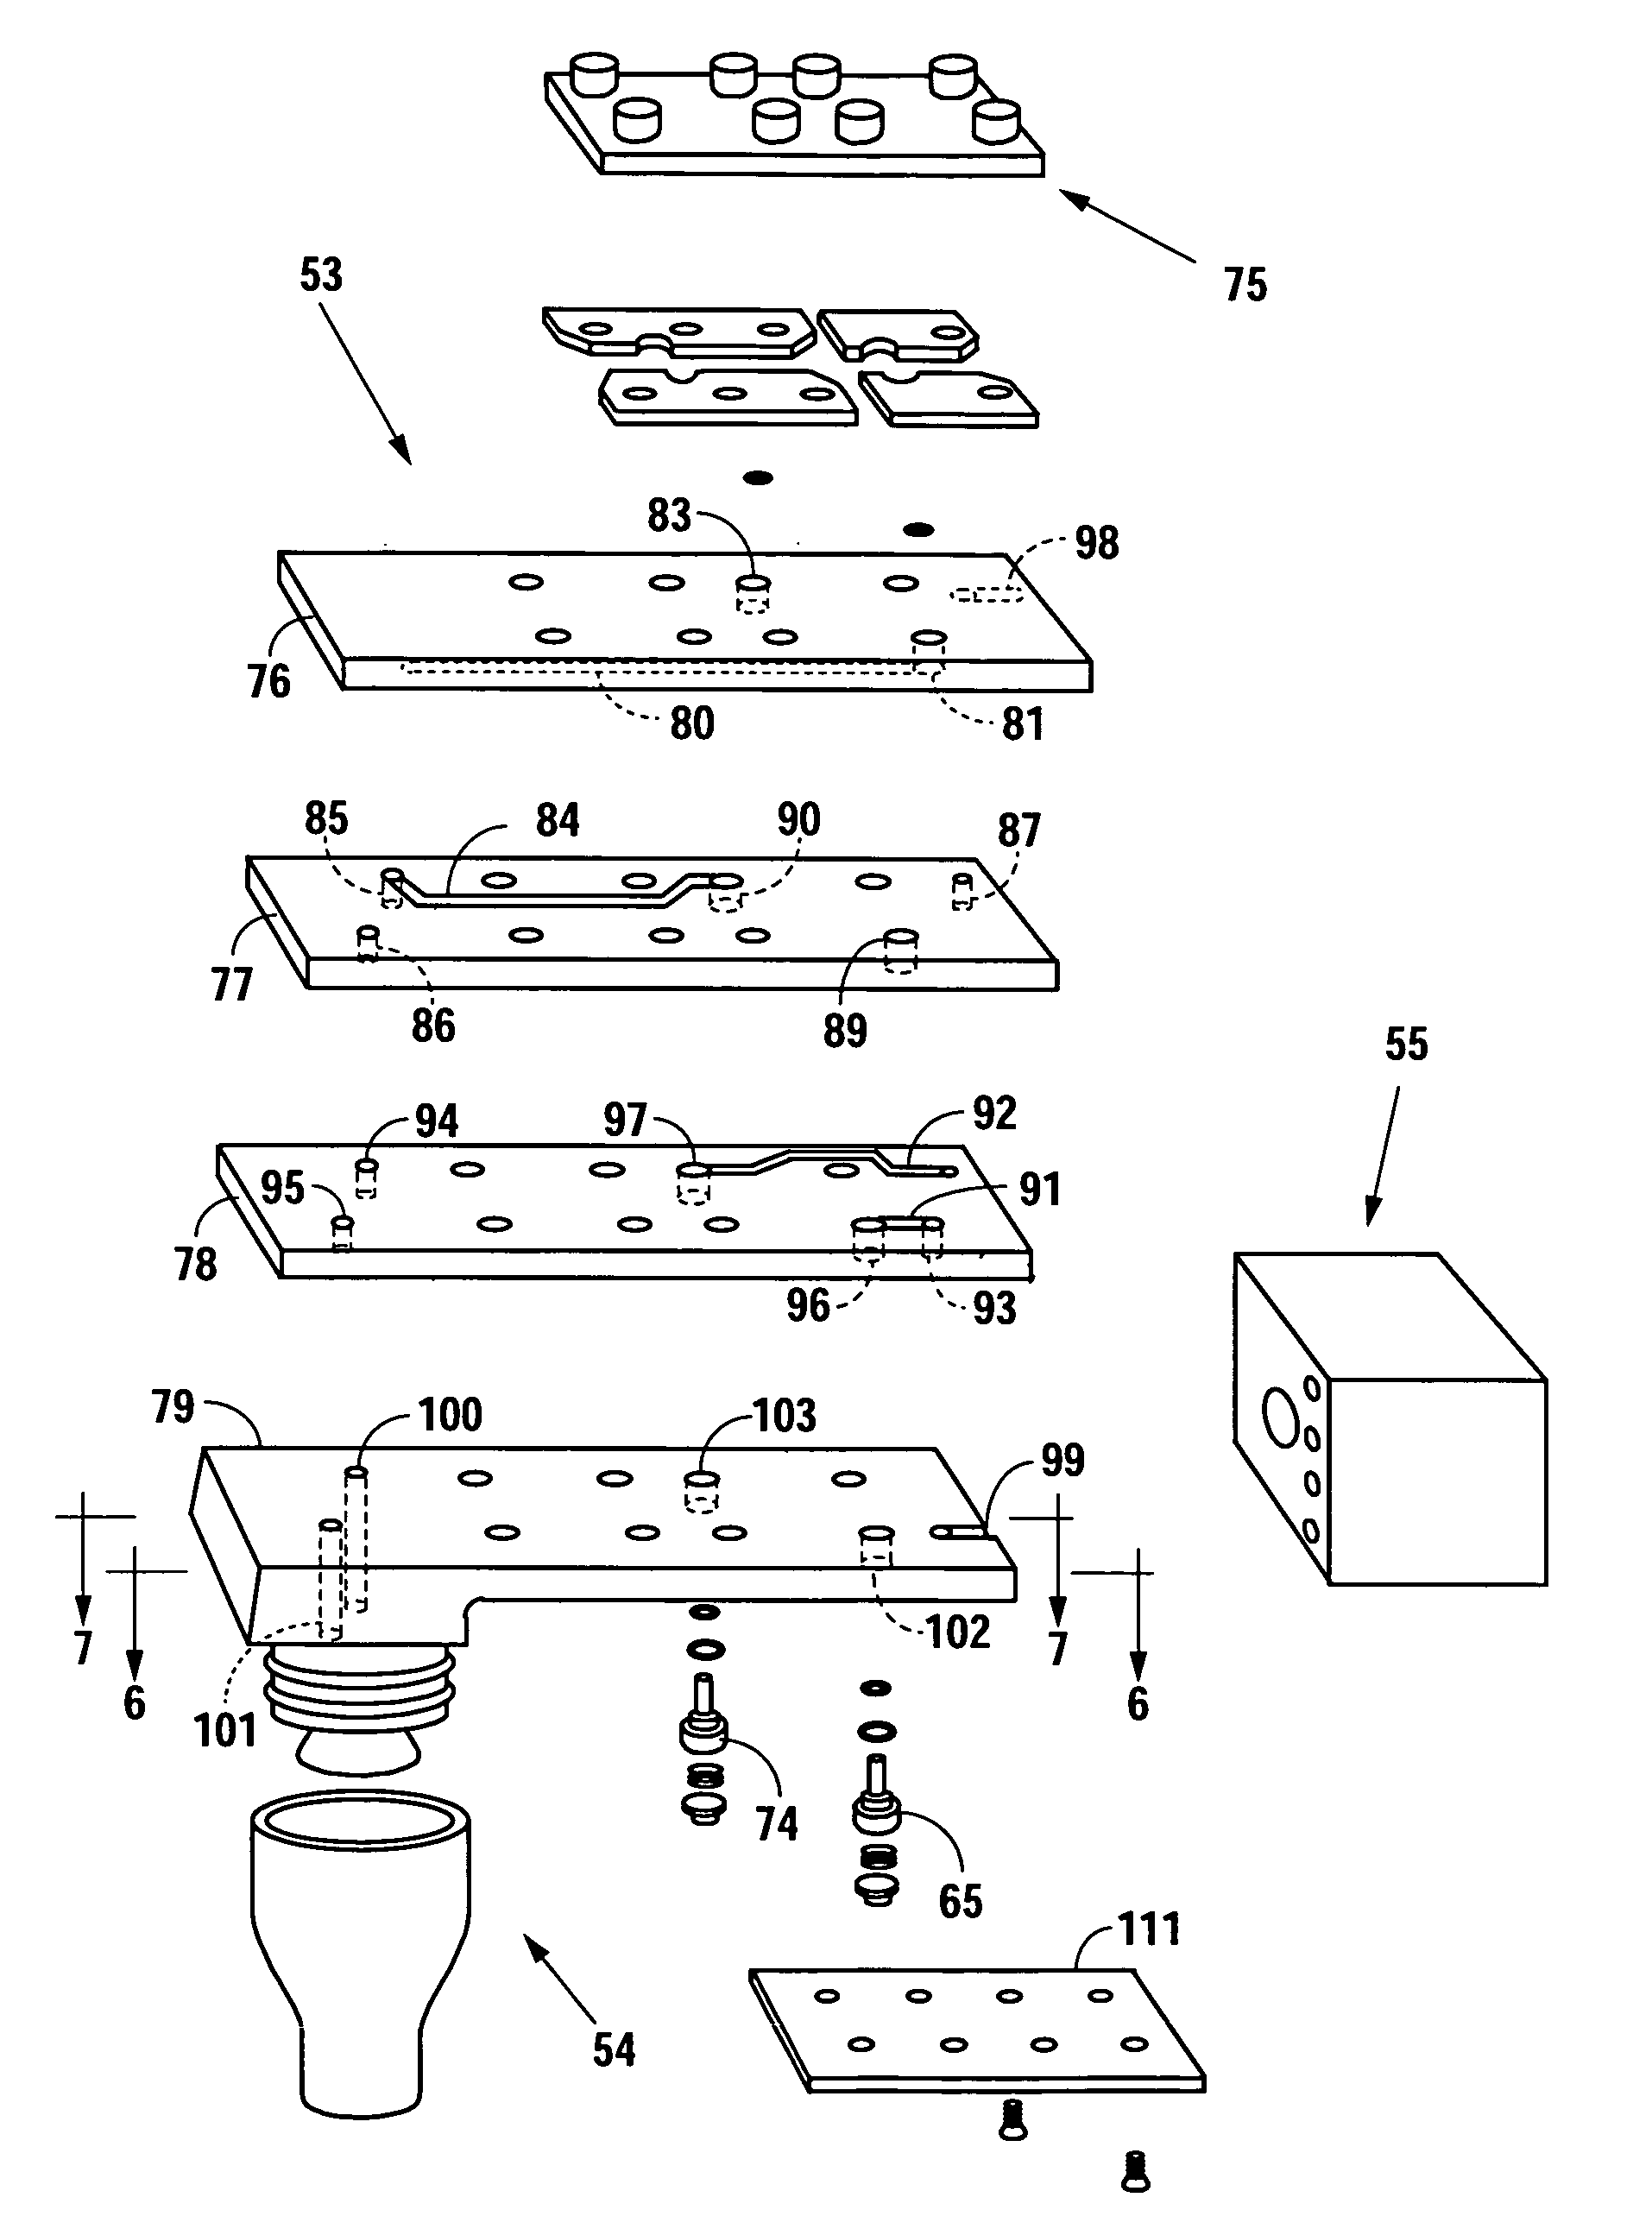 Method of manufacturing a handle for a beverage dispensing head